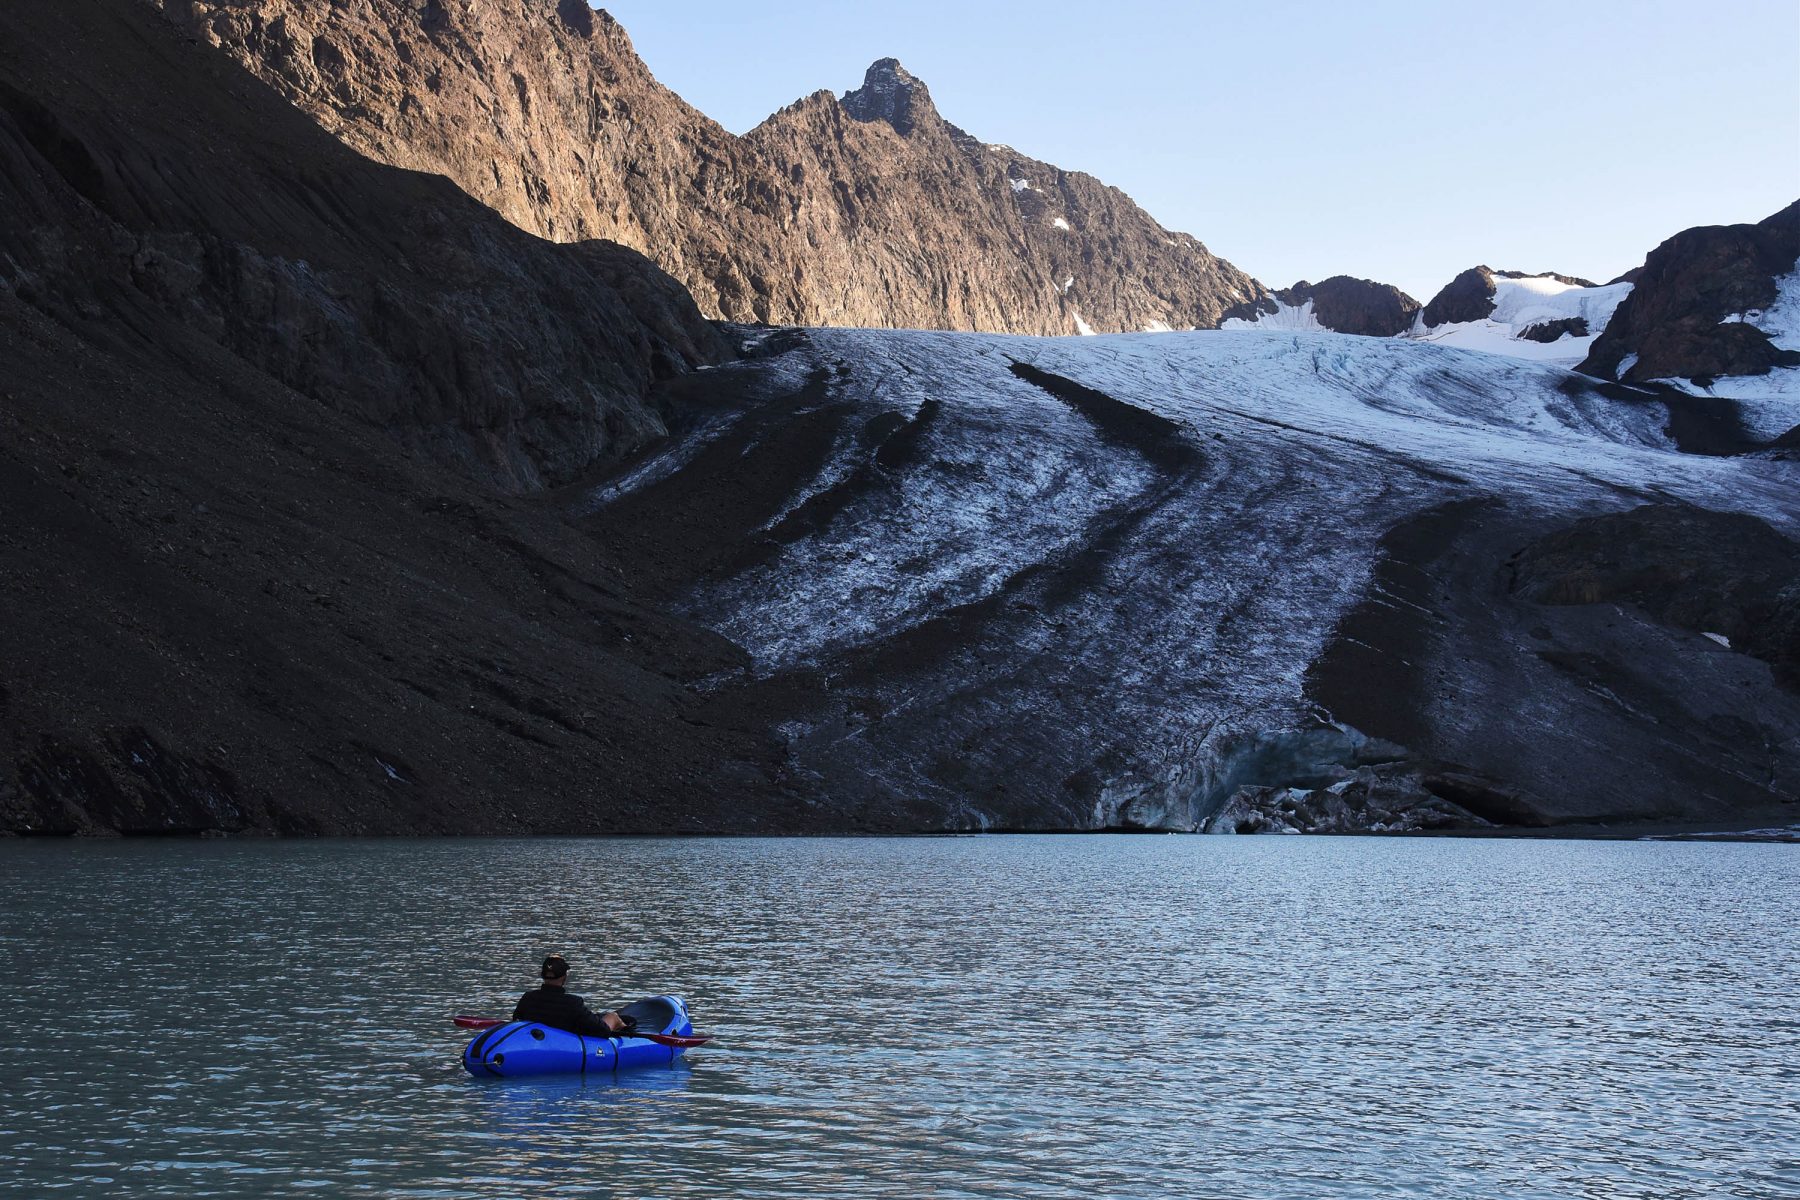 Greg Marin paddling an Alpacka Gnarwhal packraft on the unnamed lake below Flute Glacier